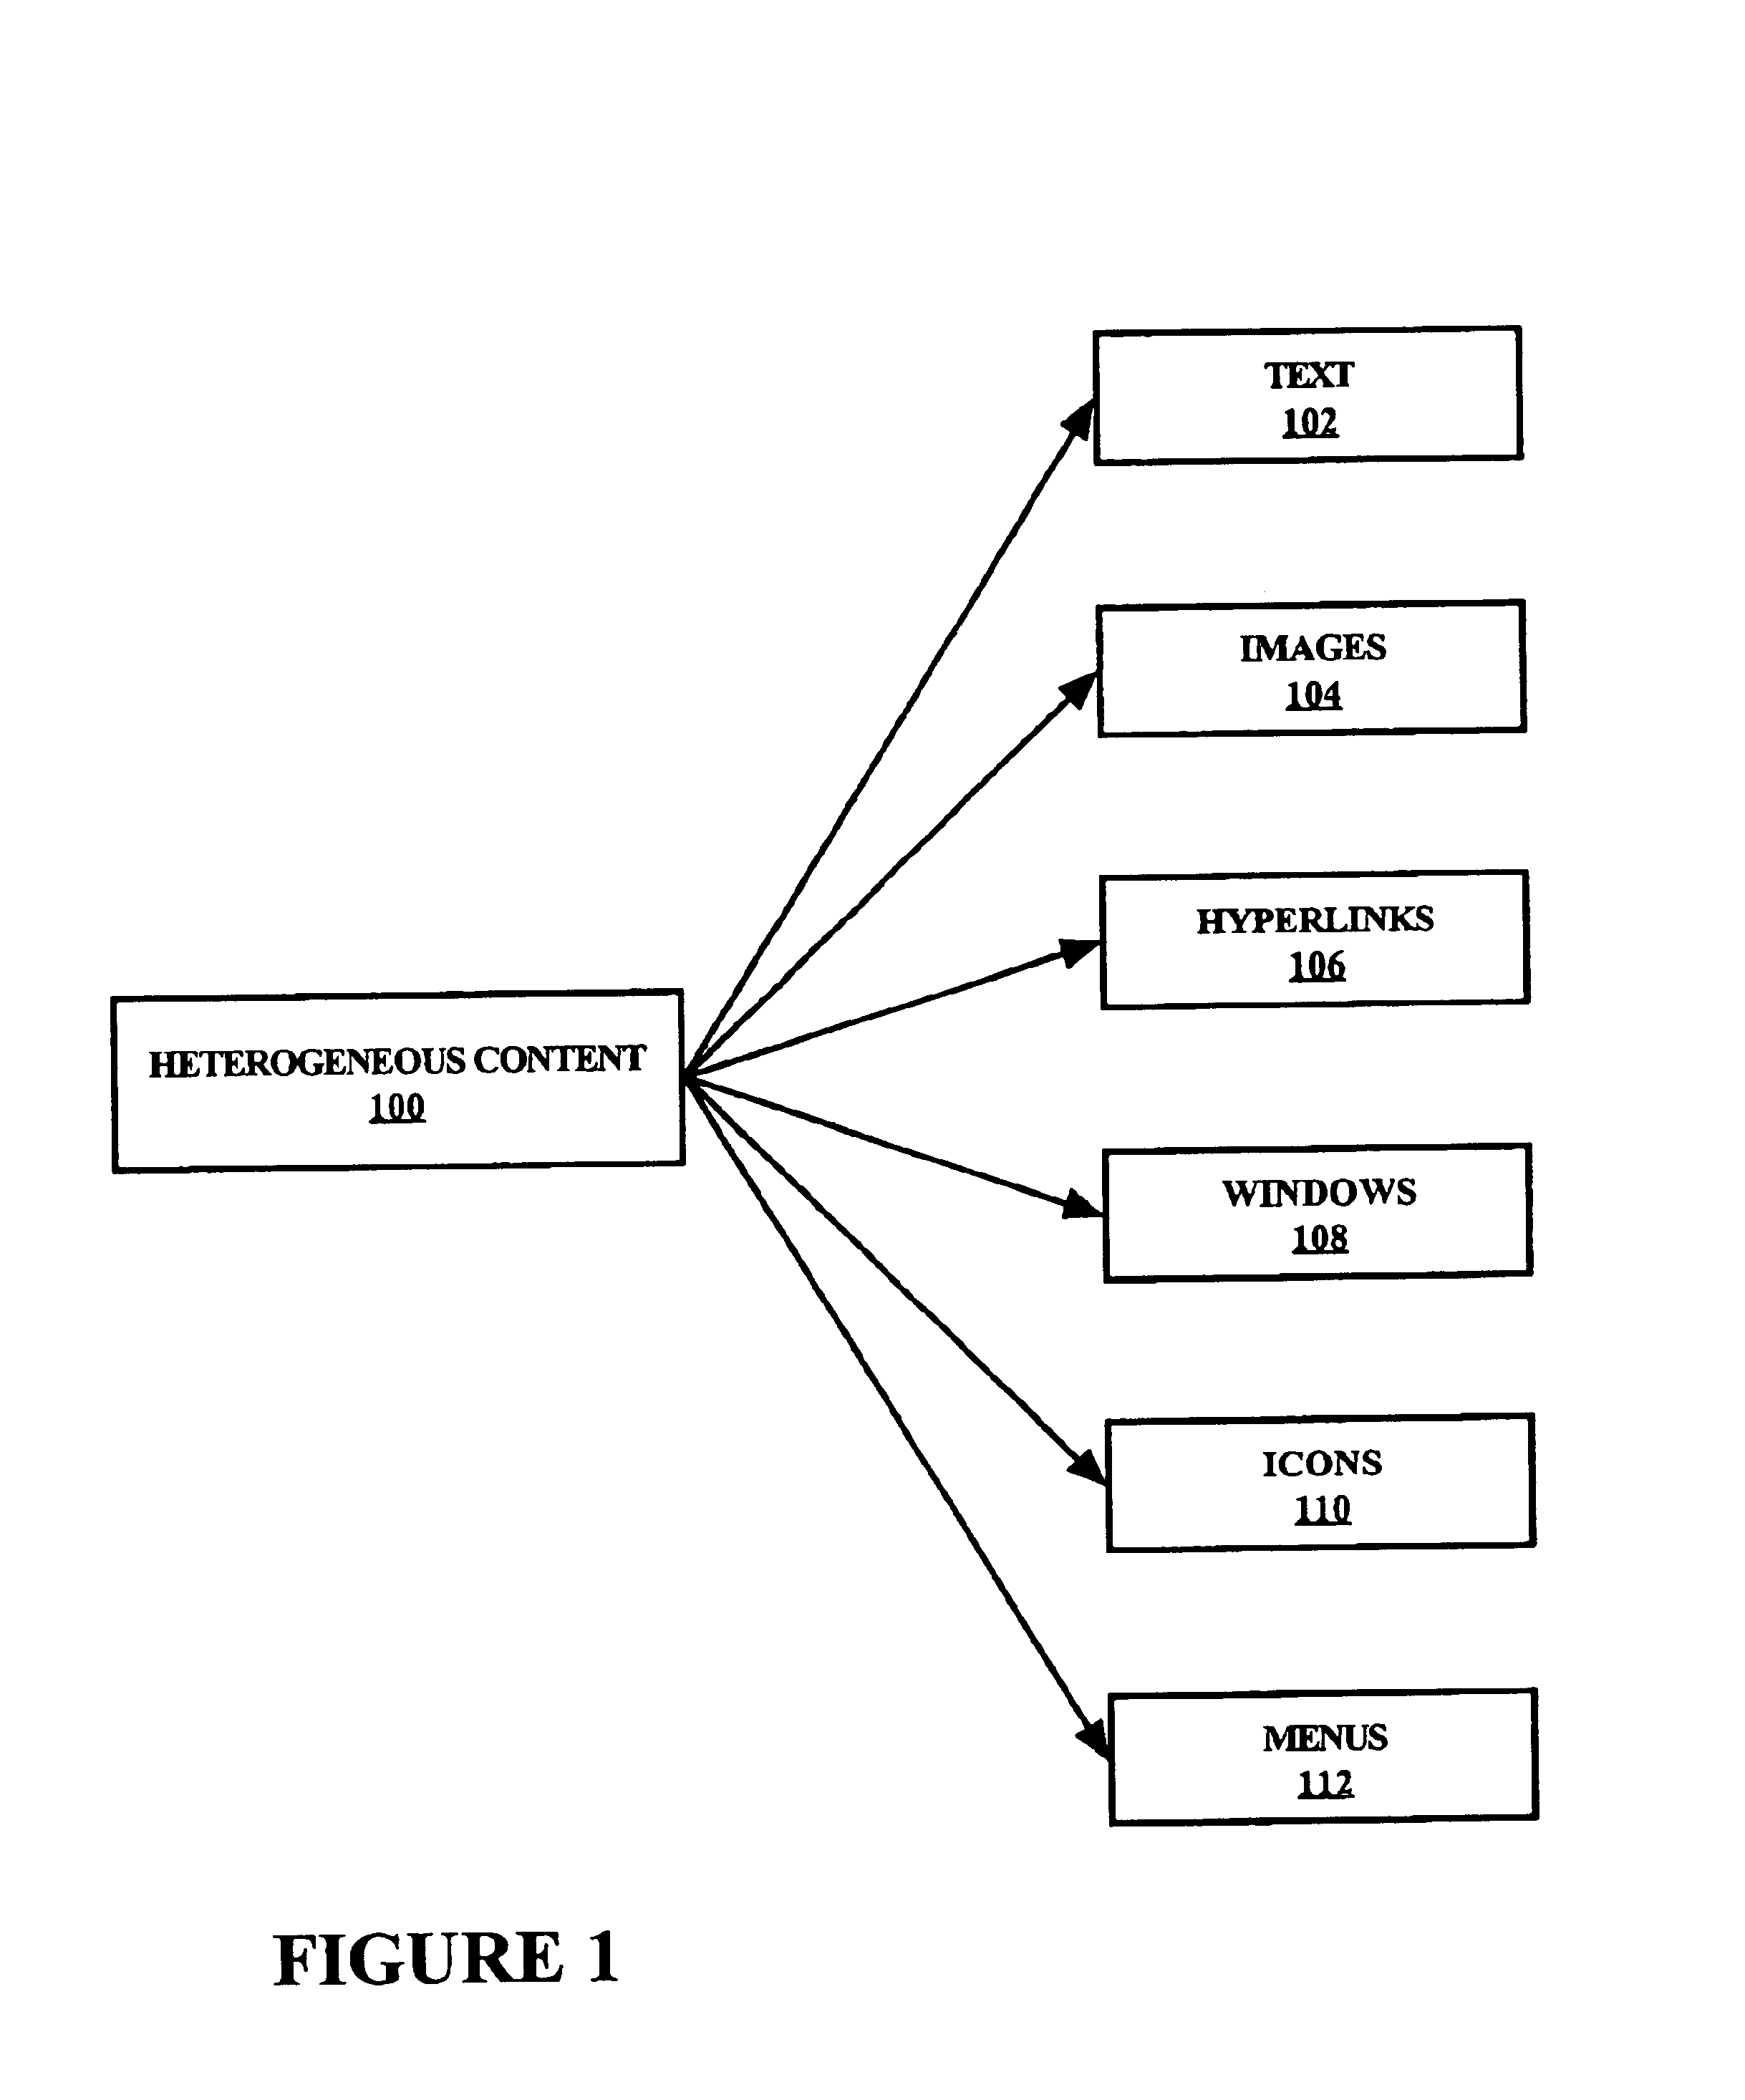 Method and system for the recognition of reading skimming and scanning from eye-gaze patterns